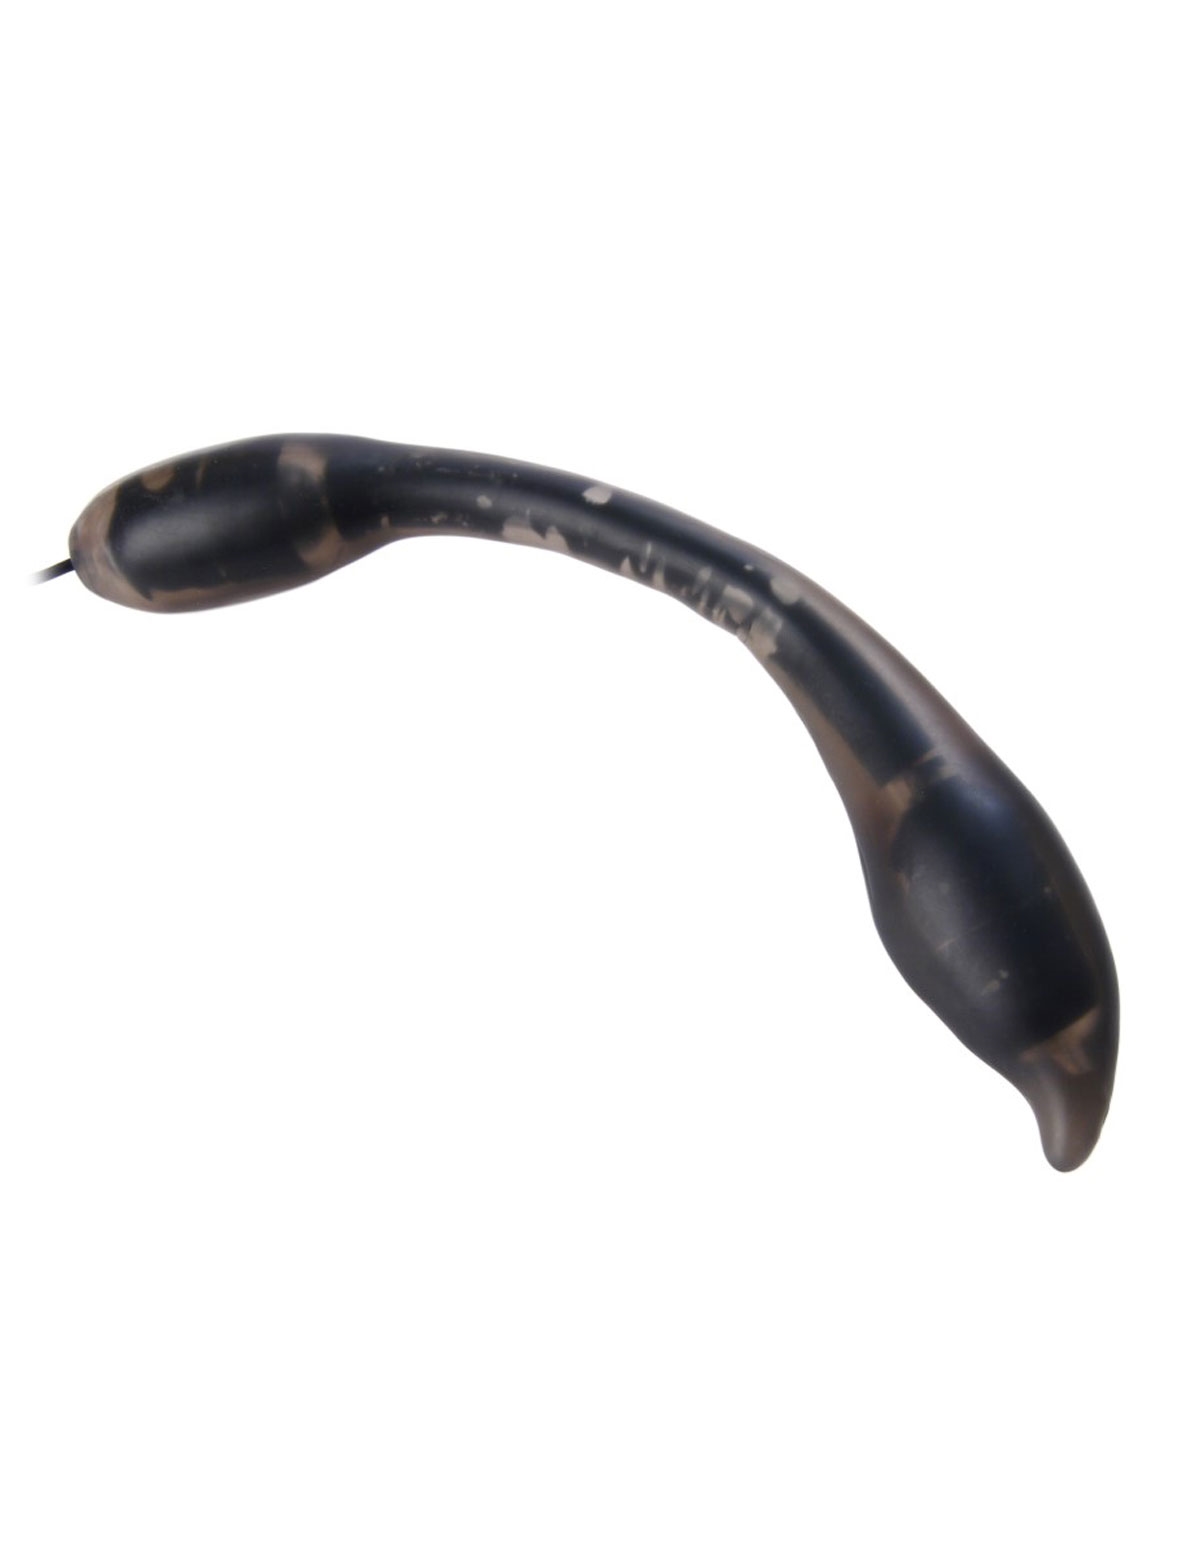 alternate image for Bendable You Too Bendy Prostate Toy